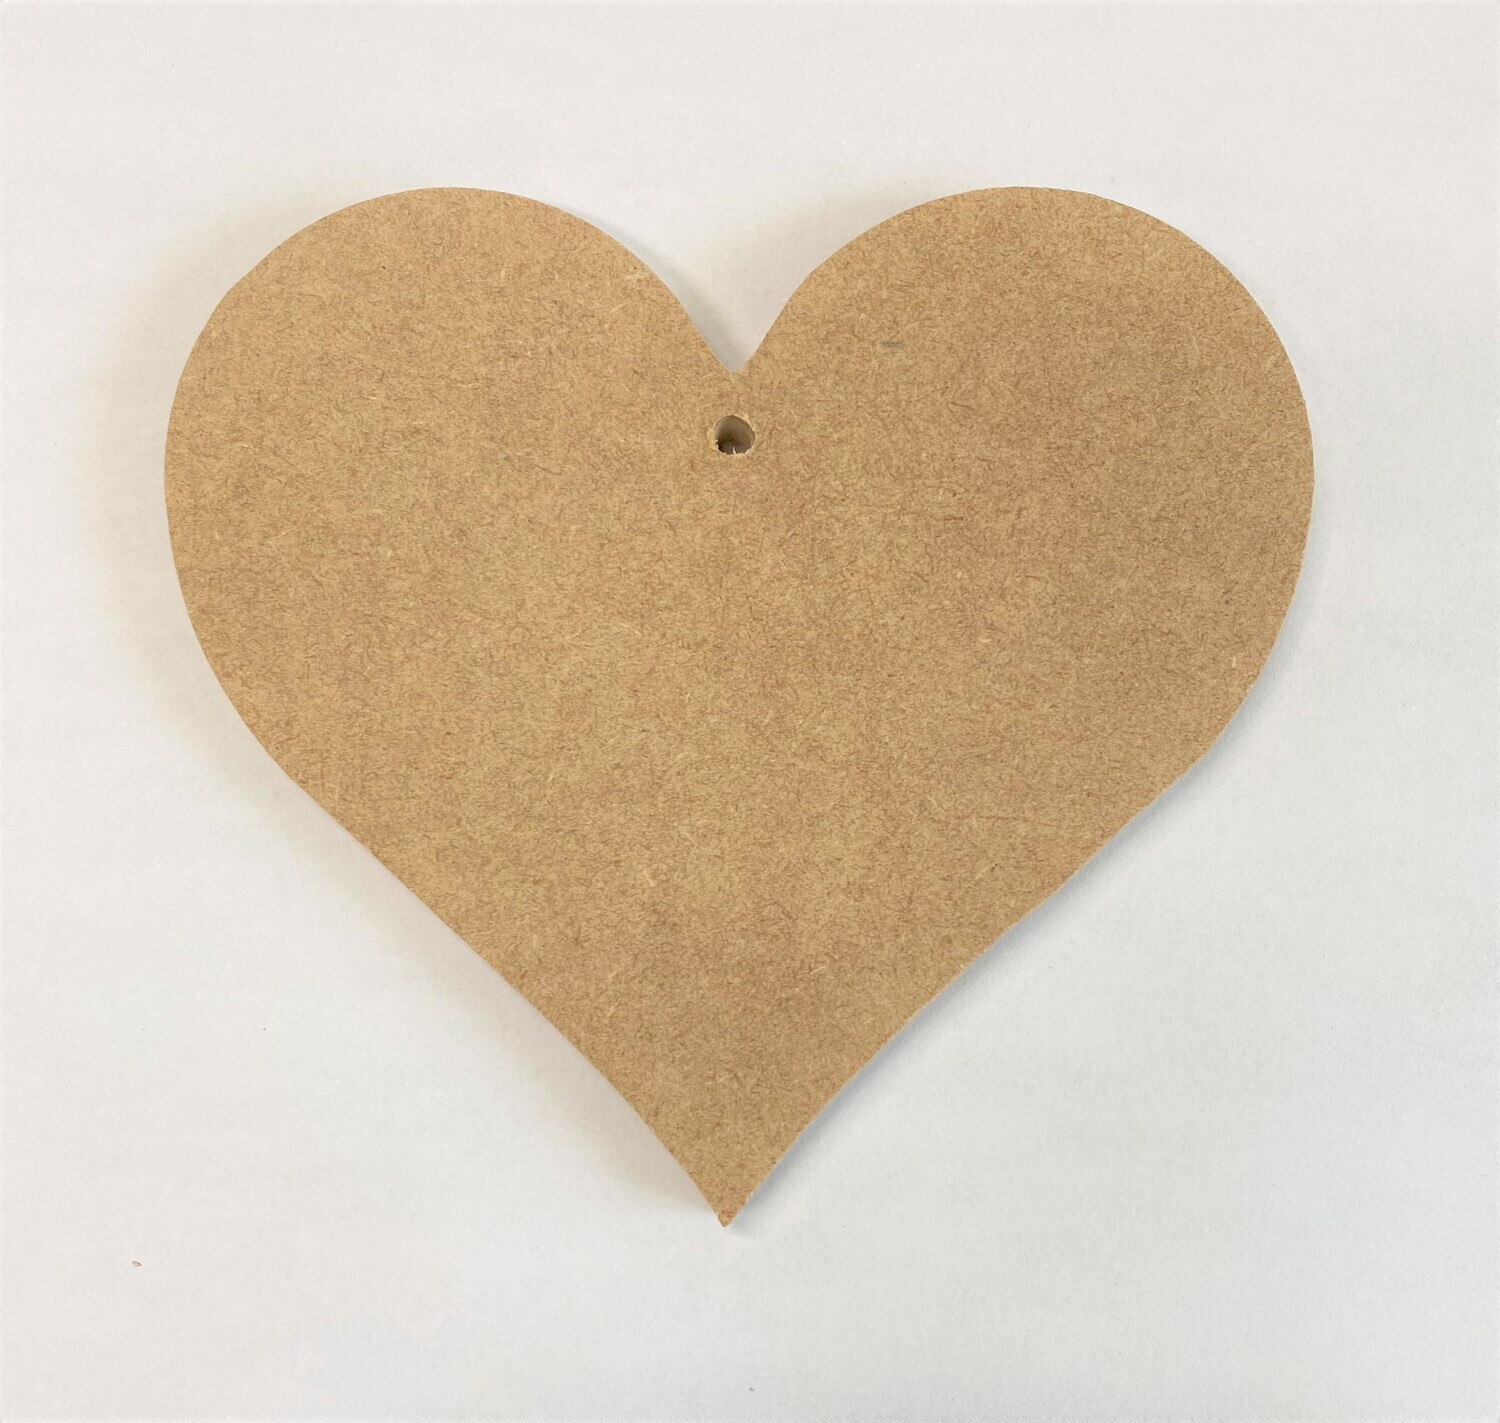 Heart 5" - 1/4" Thick MDF